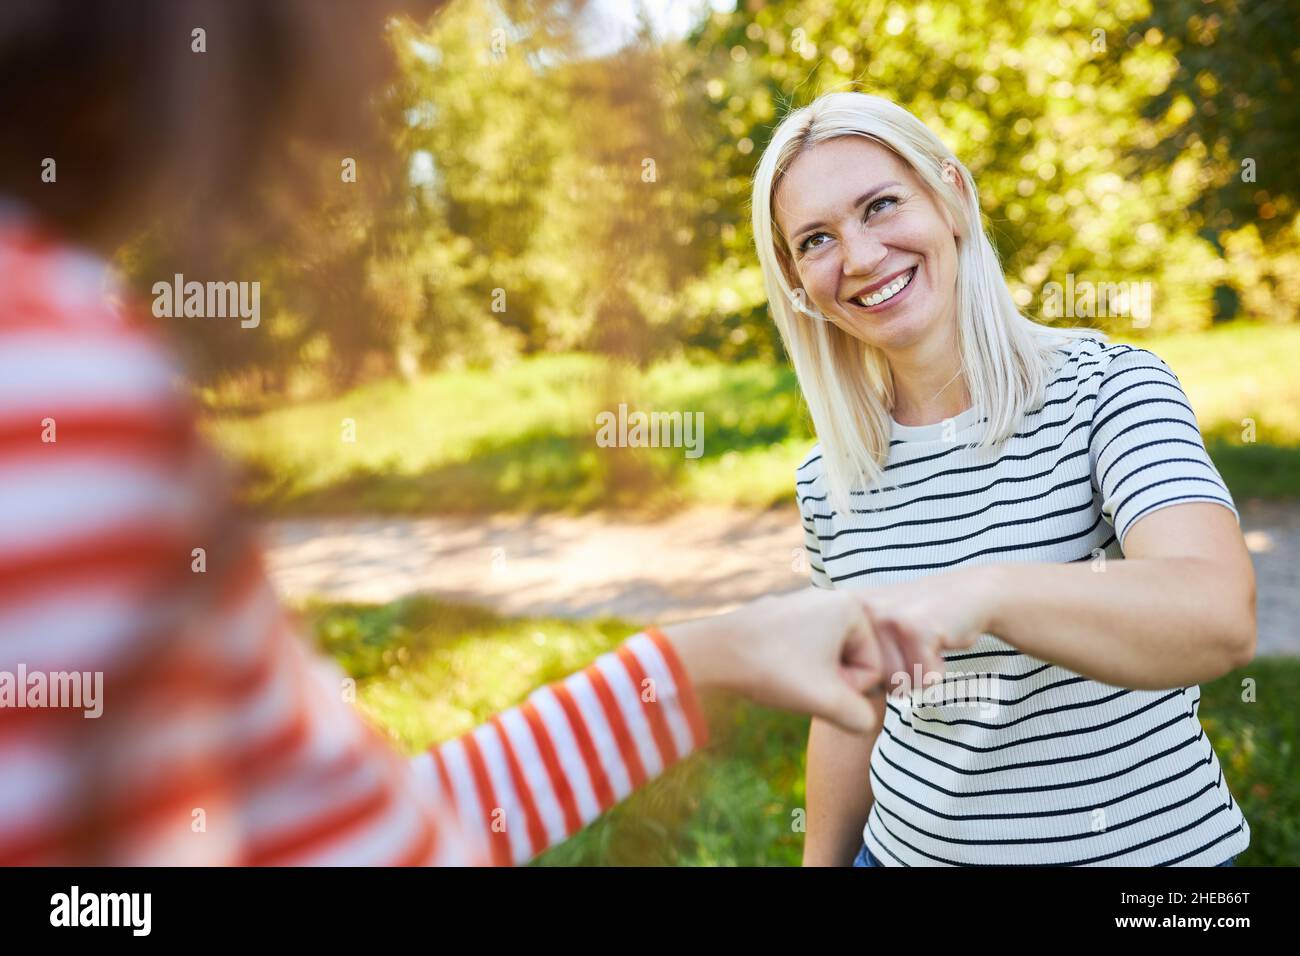 Two young women as friends during a fist bump as a symbol for teamwork and motivation Stock Photo